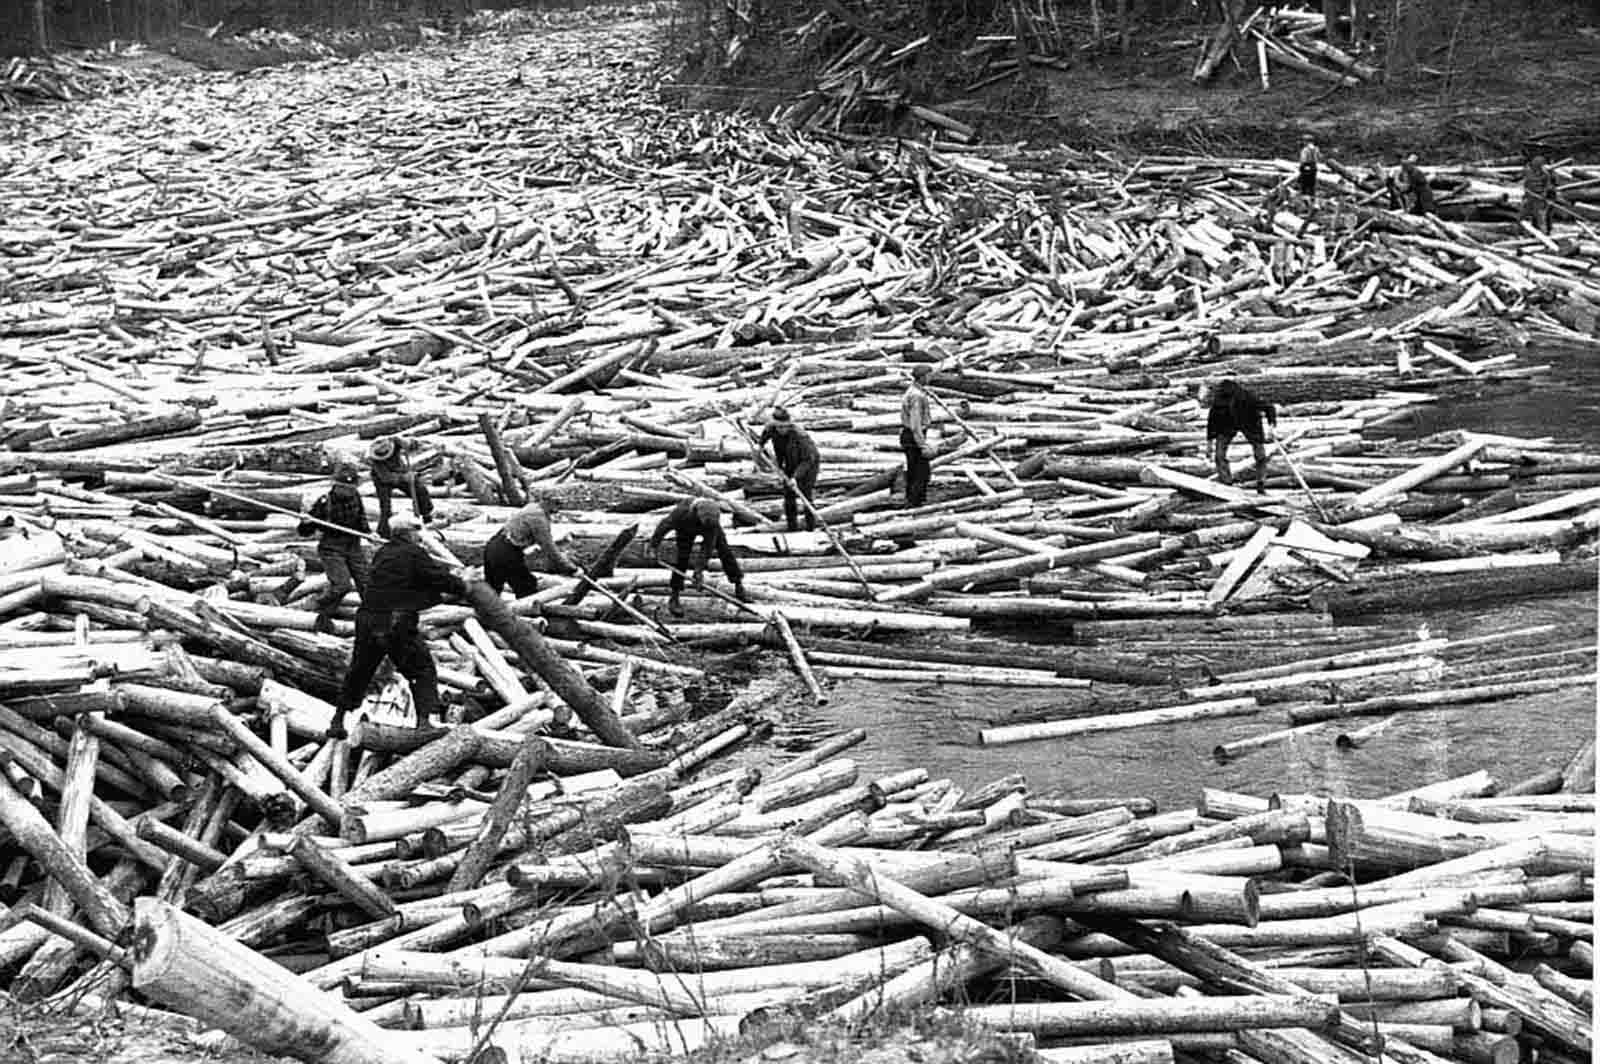 Several log rollers in the 1930s break up a log jam on the Little Fork River during the last log drive on that river in Koochiching County, Minnesota